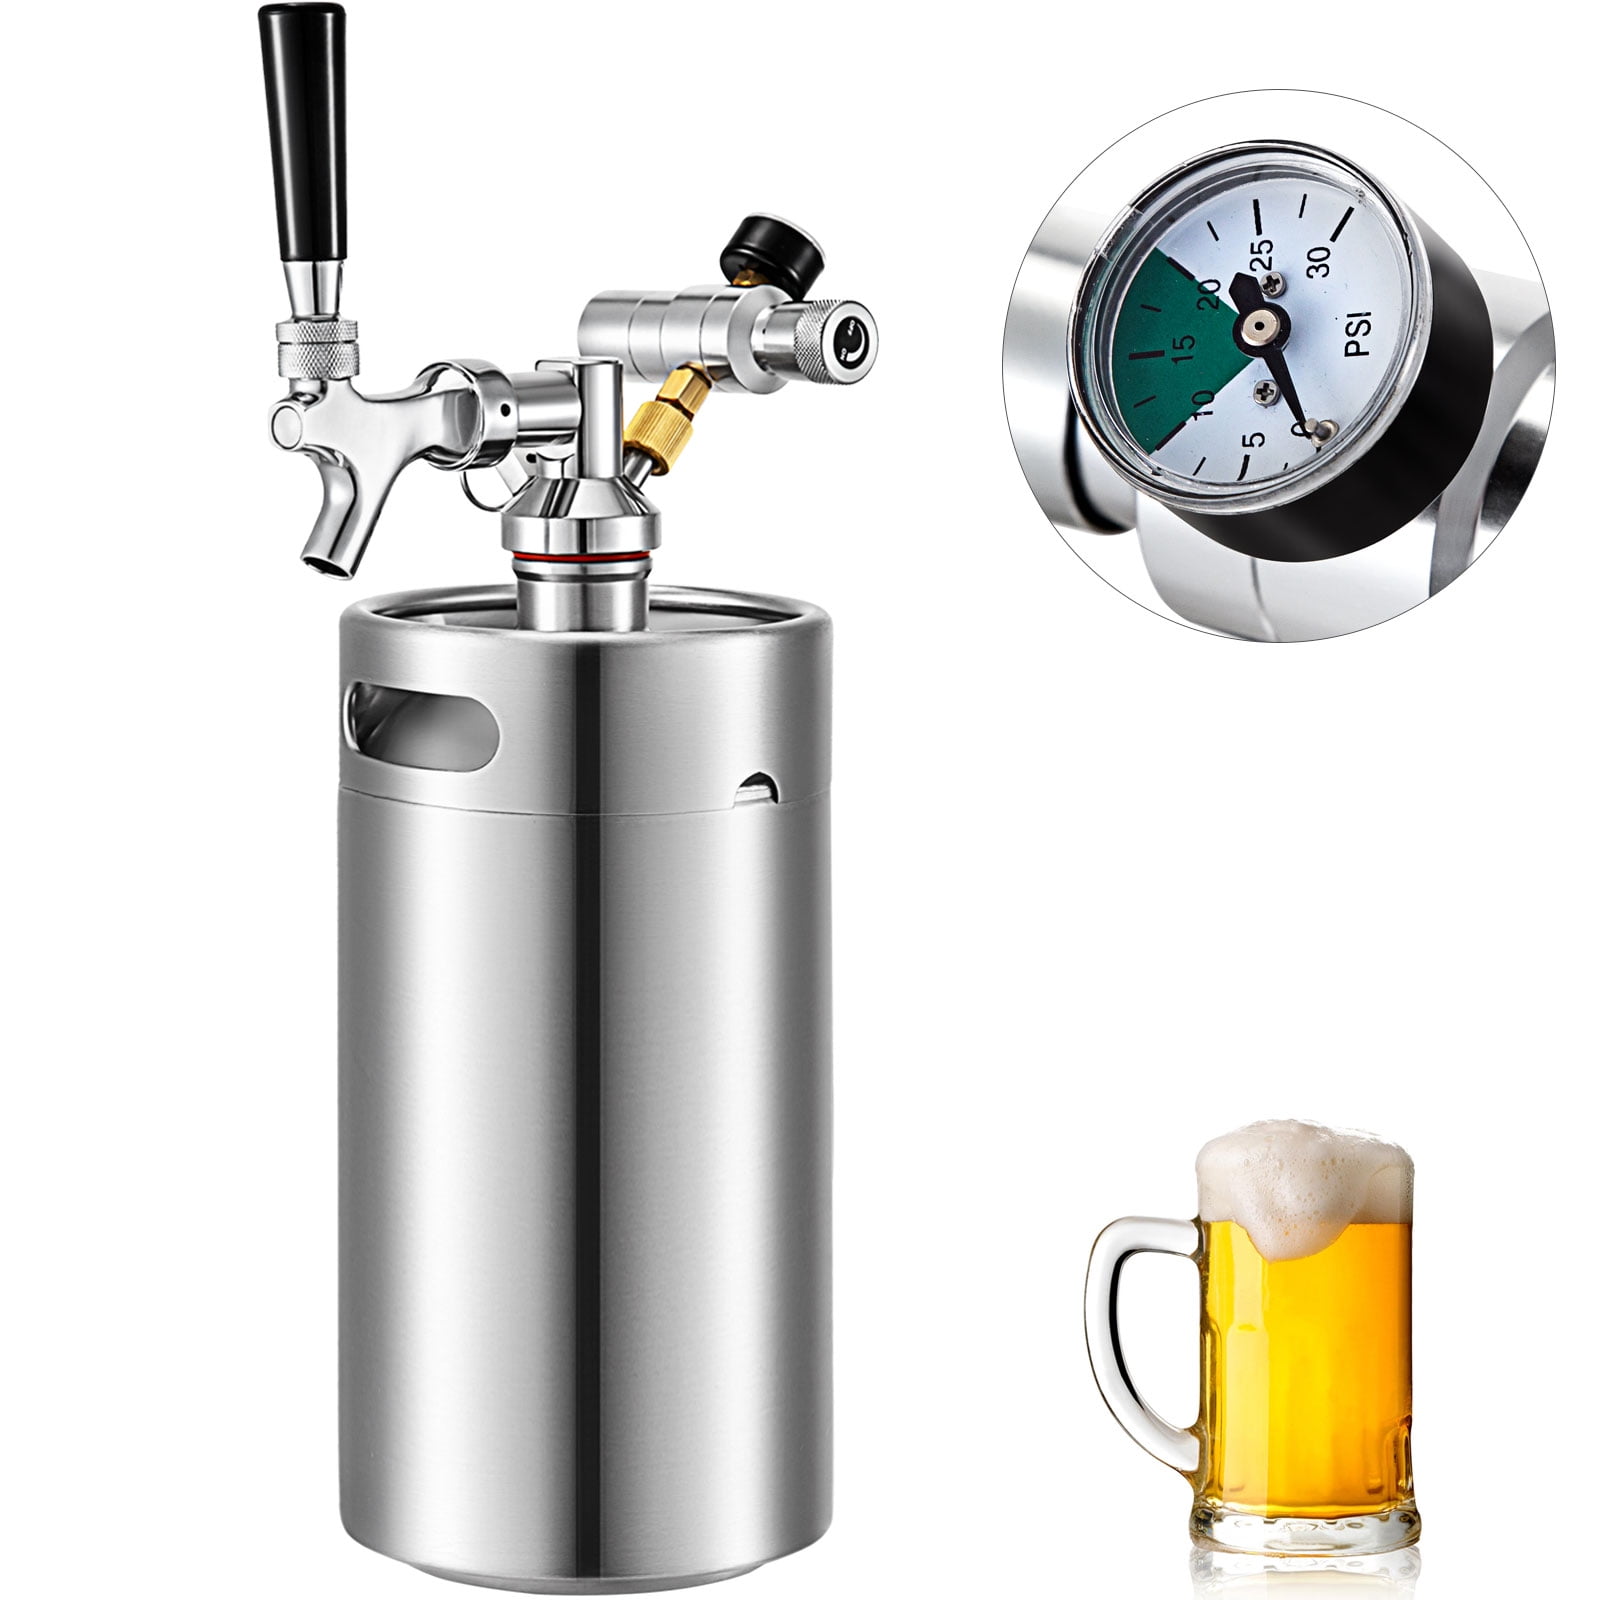 Camping and Picnic Beer Dispenser for Home 3.6L Stainless Steel Beer Barrel Mini Beer Keg